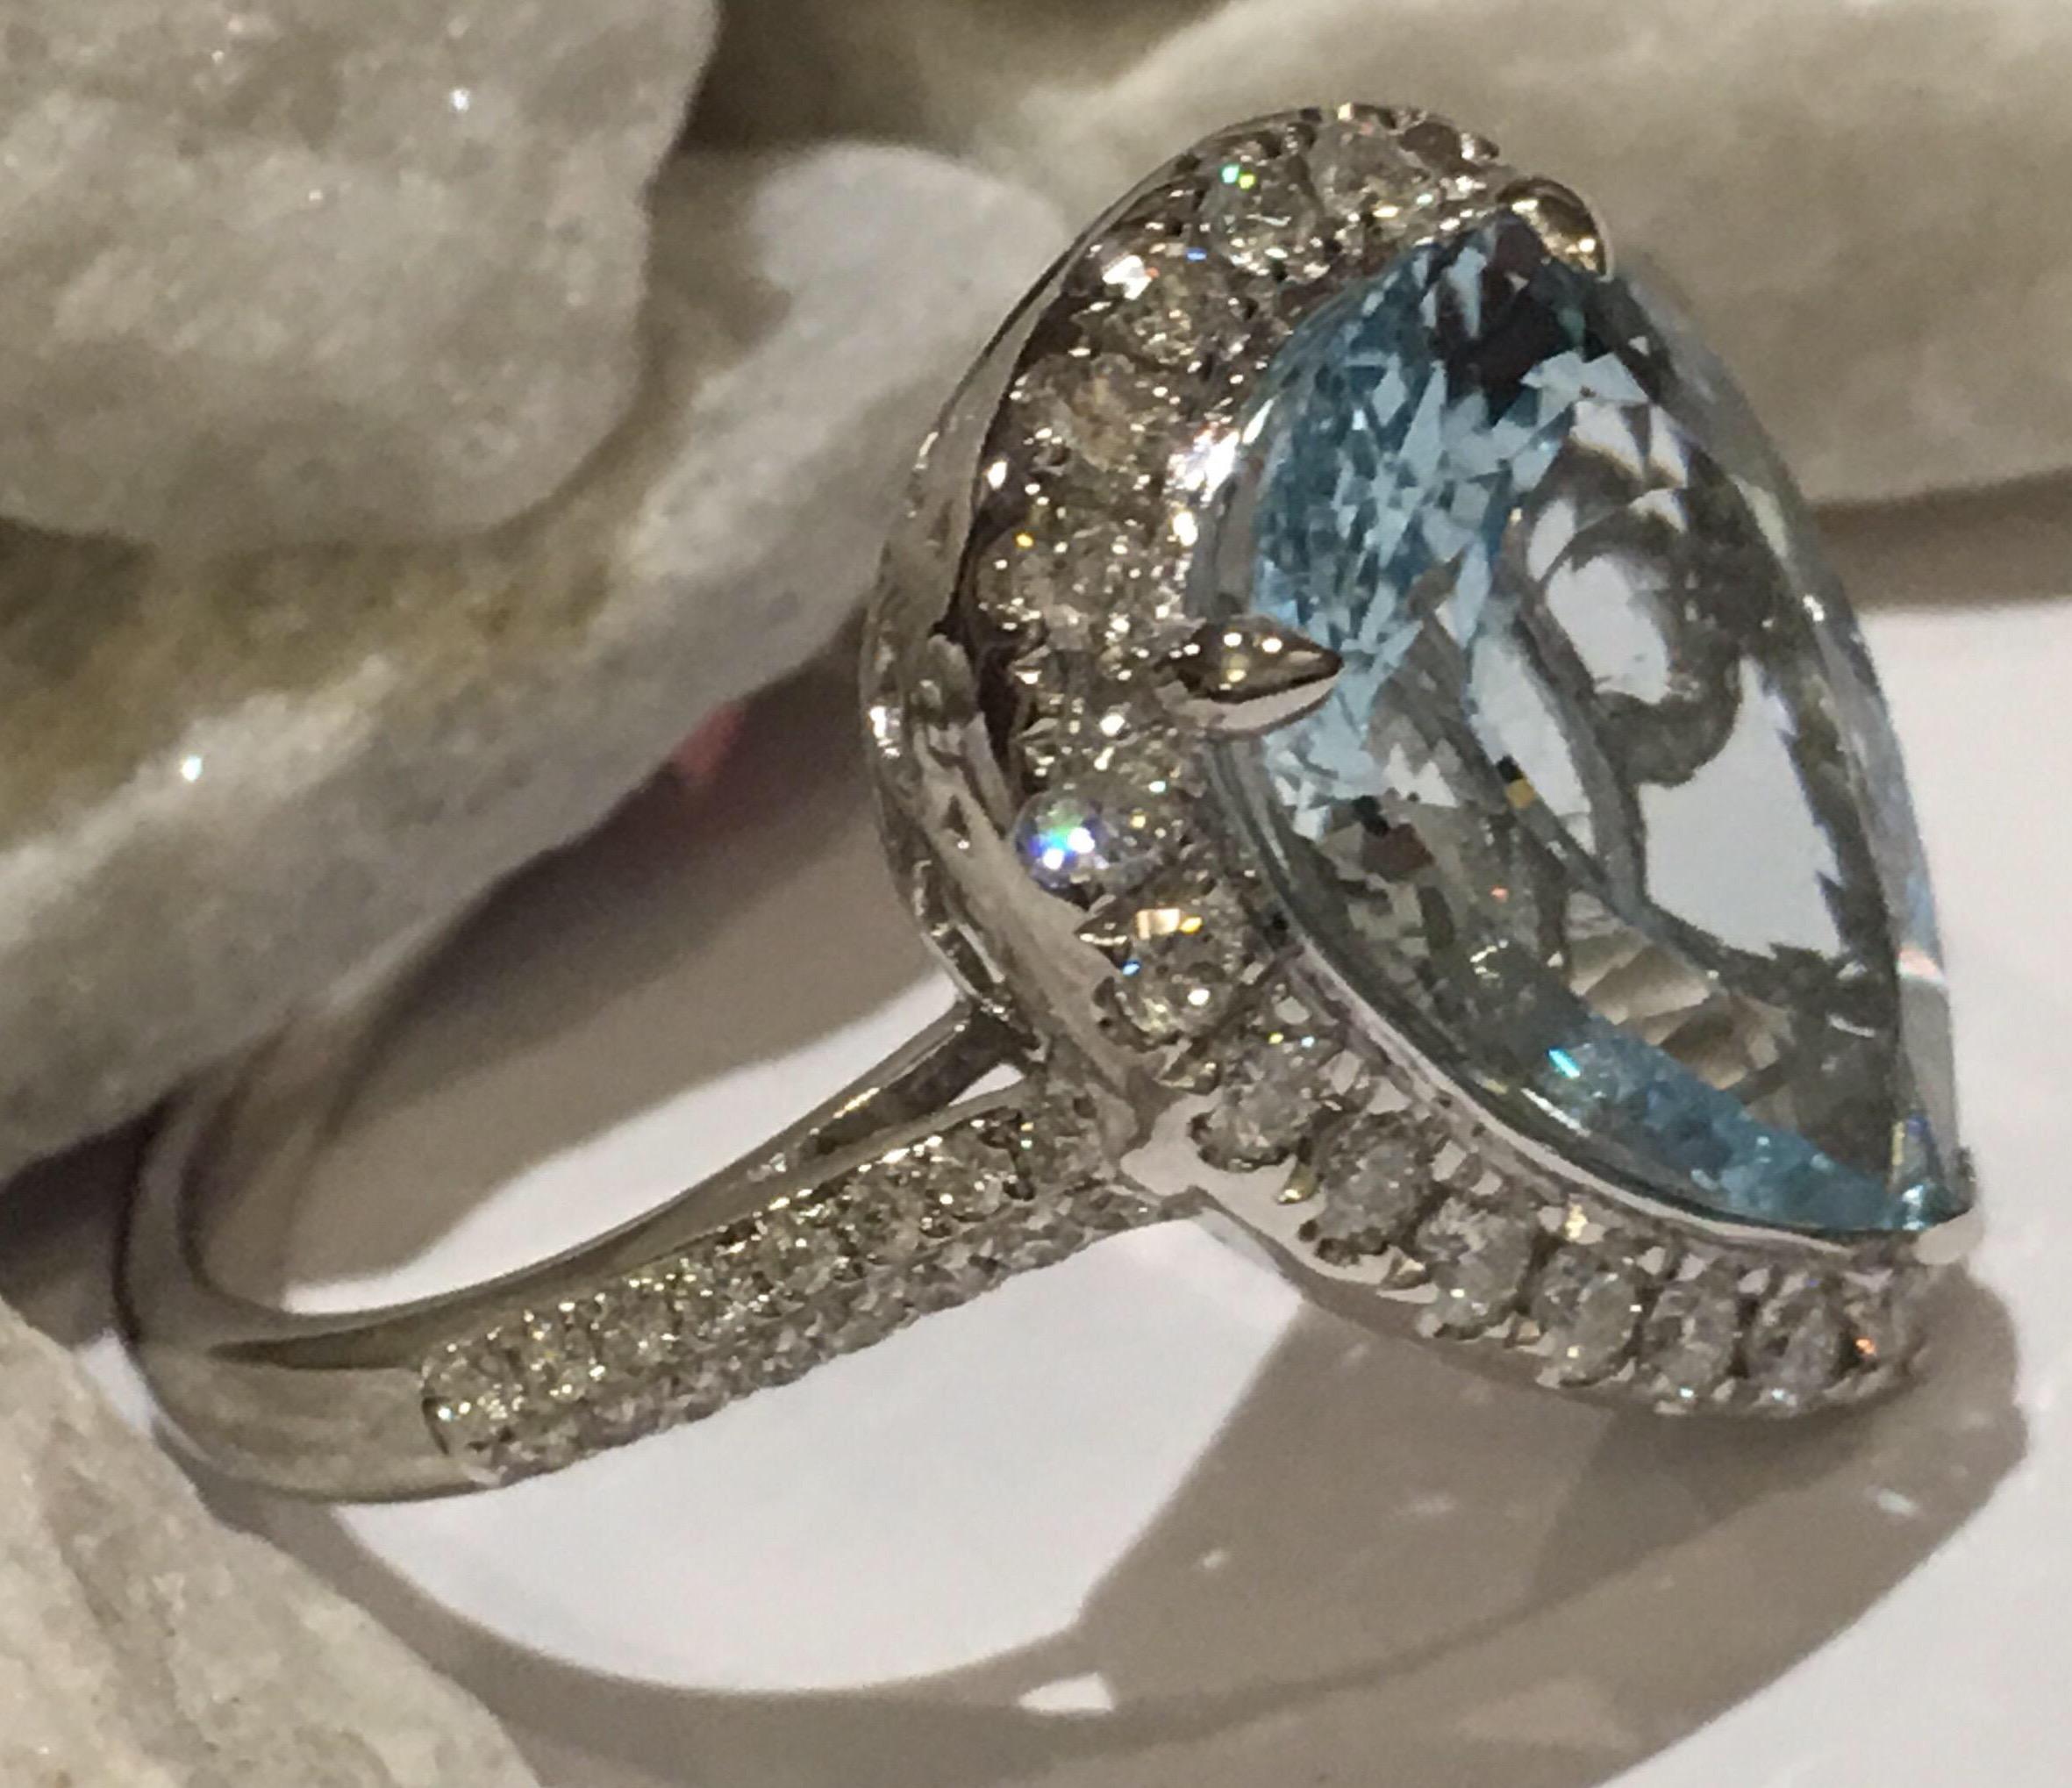 Natural Aquamarine set in 14K white gold. Pear shape 3.81 Carat Aquamarine is with 0.55 Carat Diamonds.
One of a kind handcrafted ring is elegant.
The size of the ring is 7 and this ring can be resized.